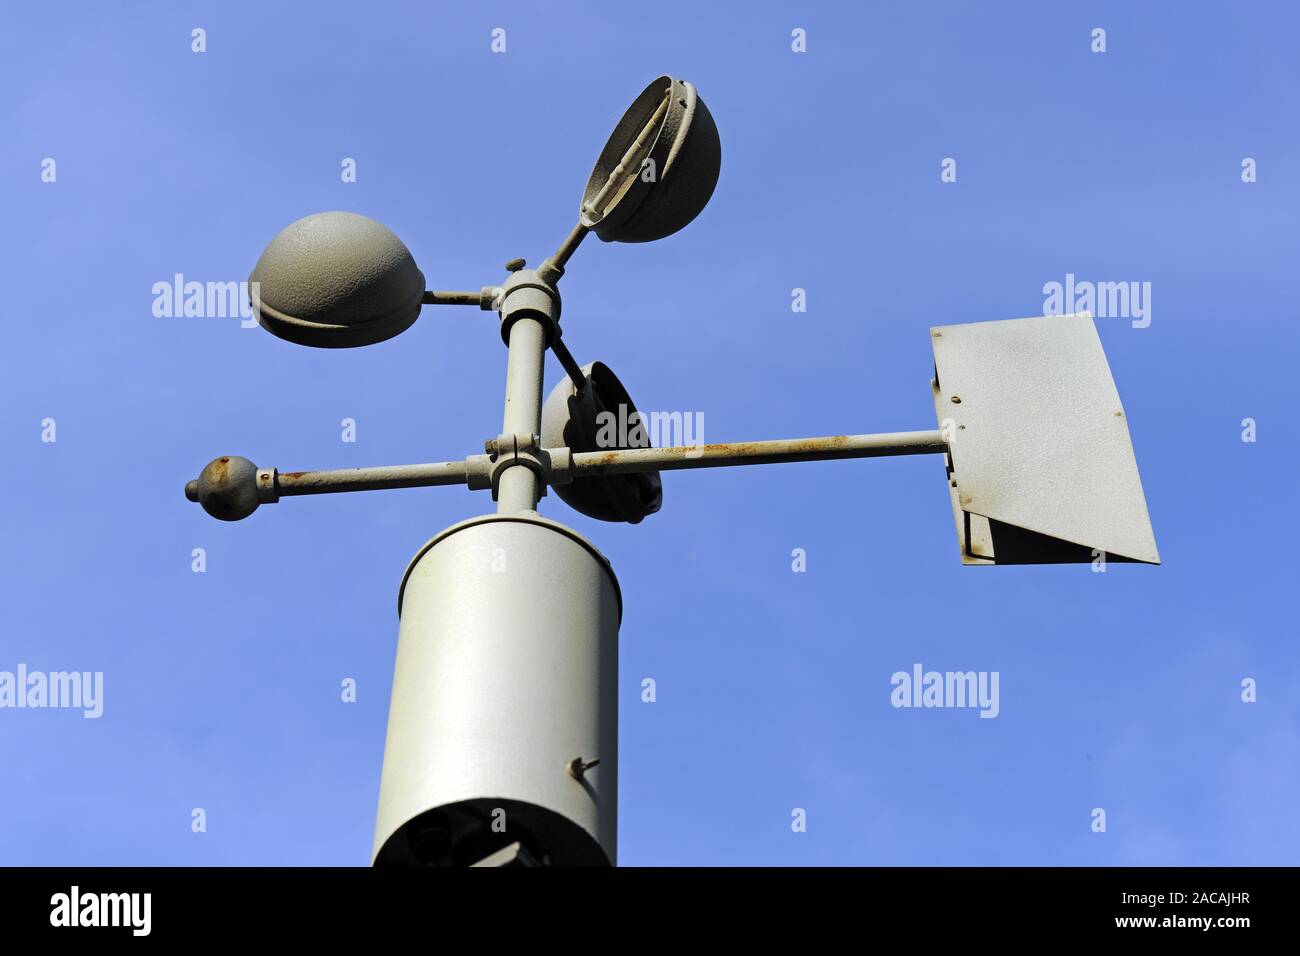 Cup star anemometer with wind vane for measuring wind speed Stock Photo